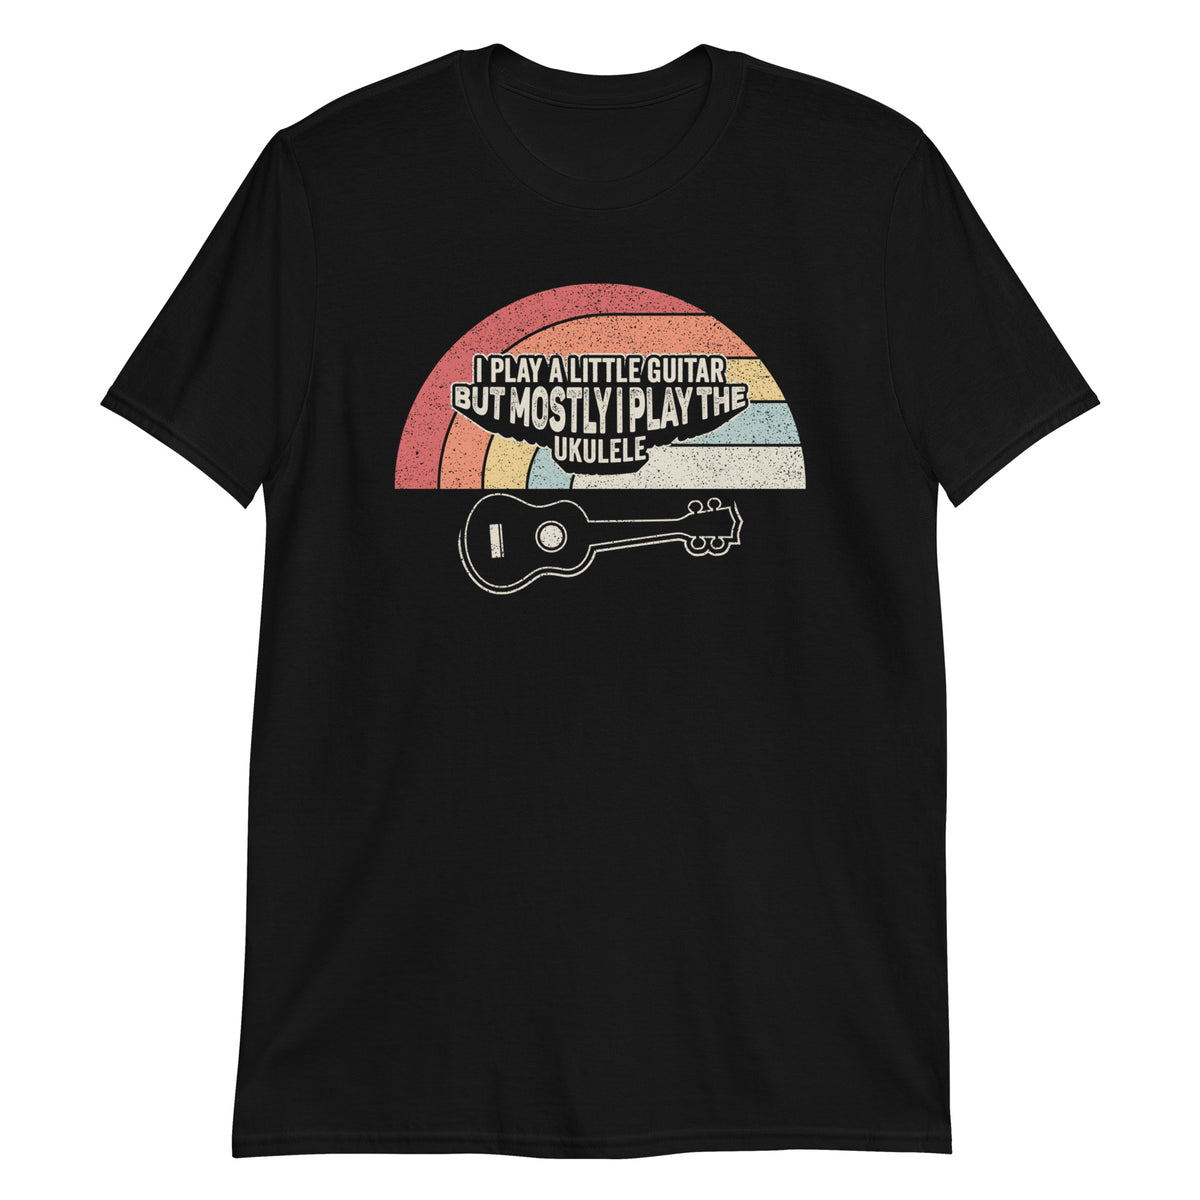 I Play a Little Guitar But Mostly I Play The Ukulele Funny T-Shirt